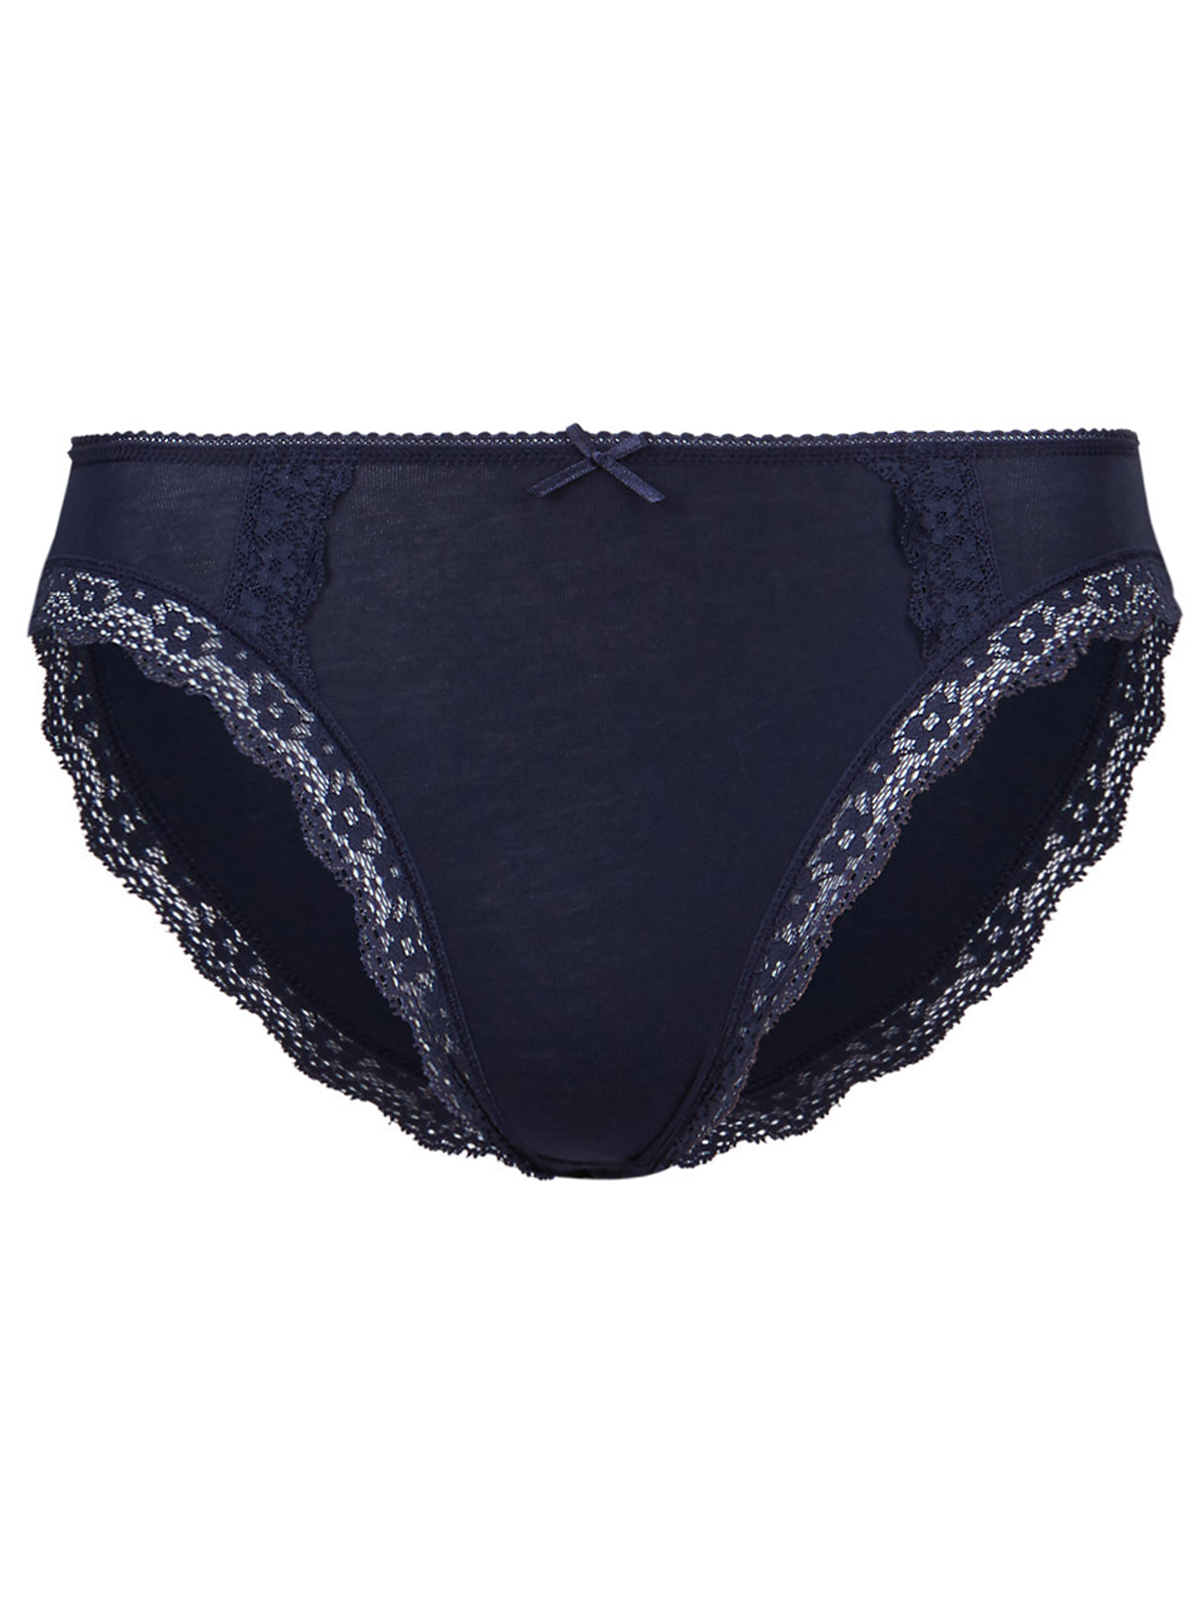 Marks and Spencer - - M&5 INDIGO Cotton Rich High Leg Knickers - Size 6 ...